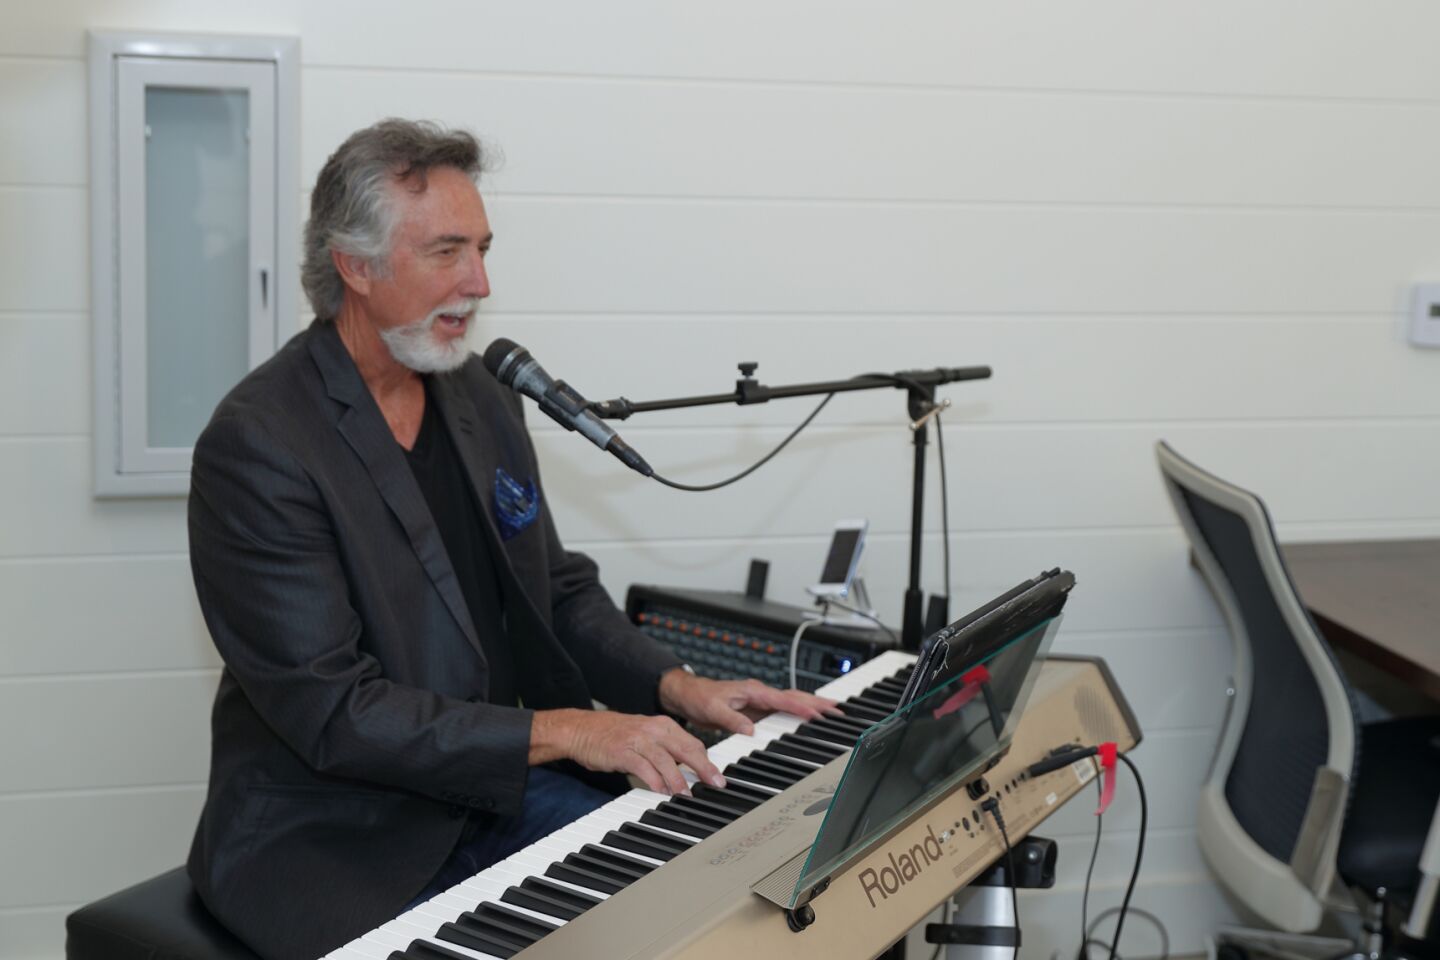 Musical entertainment was provided by Randy Beecher at the grand opening of Eric Iantorno's real estate office in Del Mar Plaza